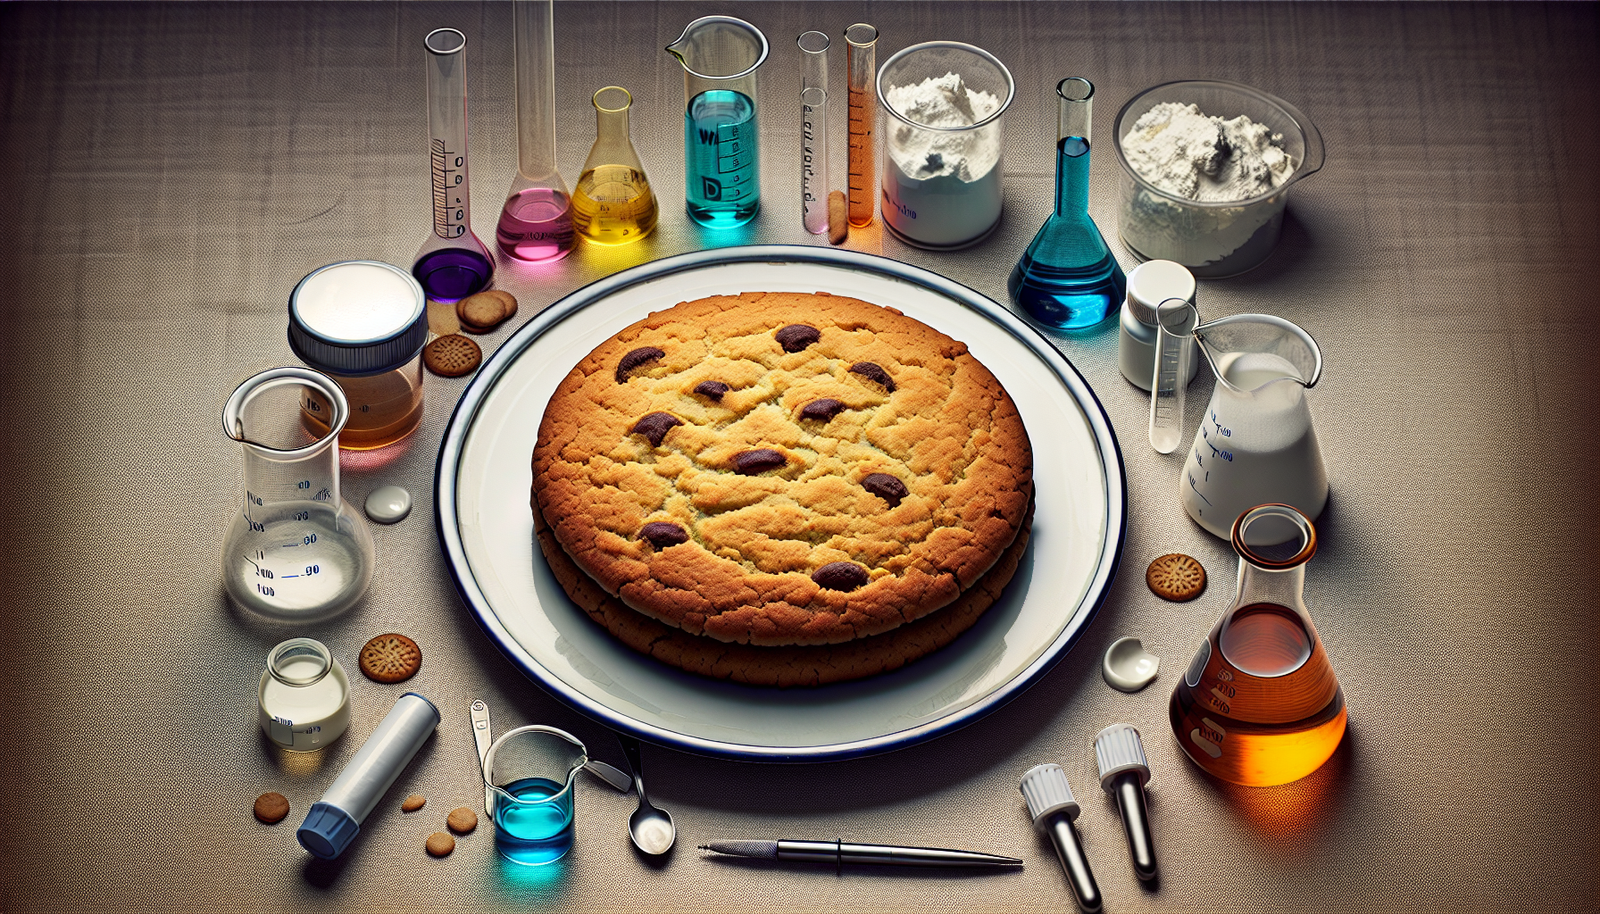 Insomnia Cookie: A Journey through the Lab